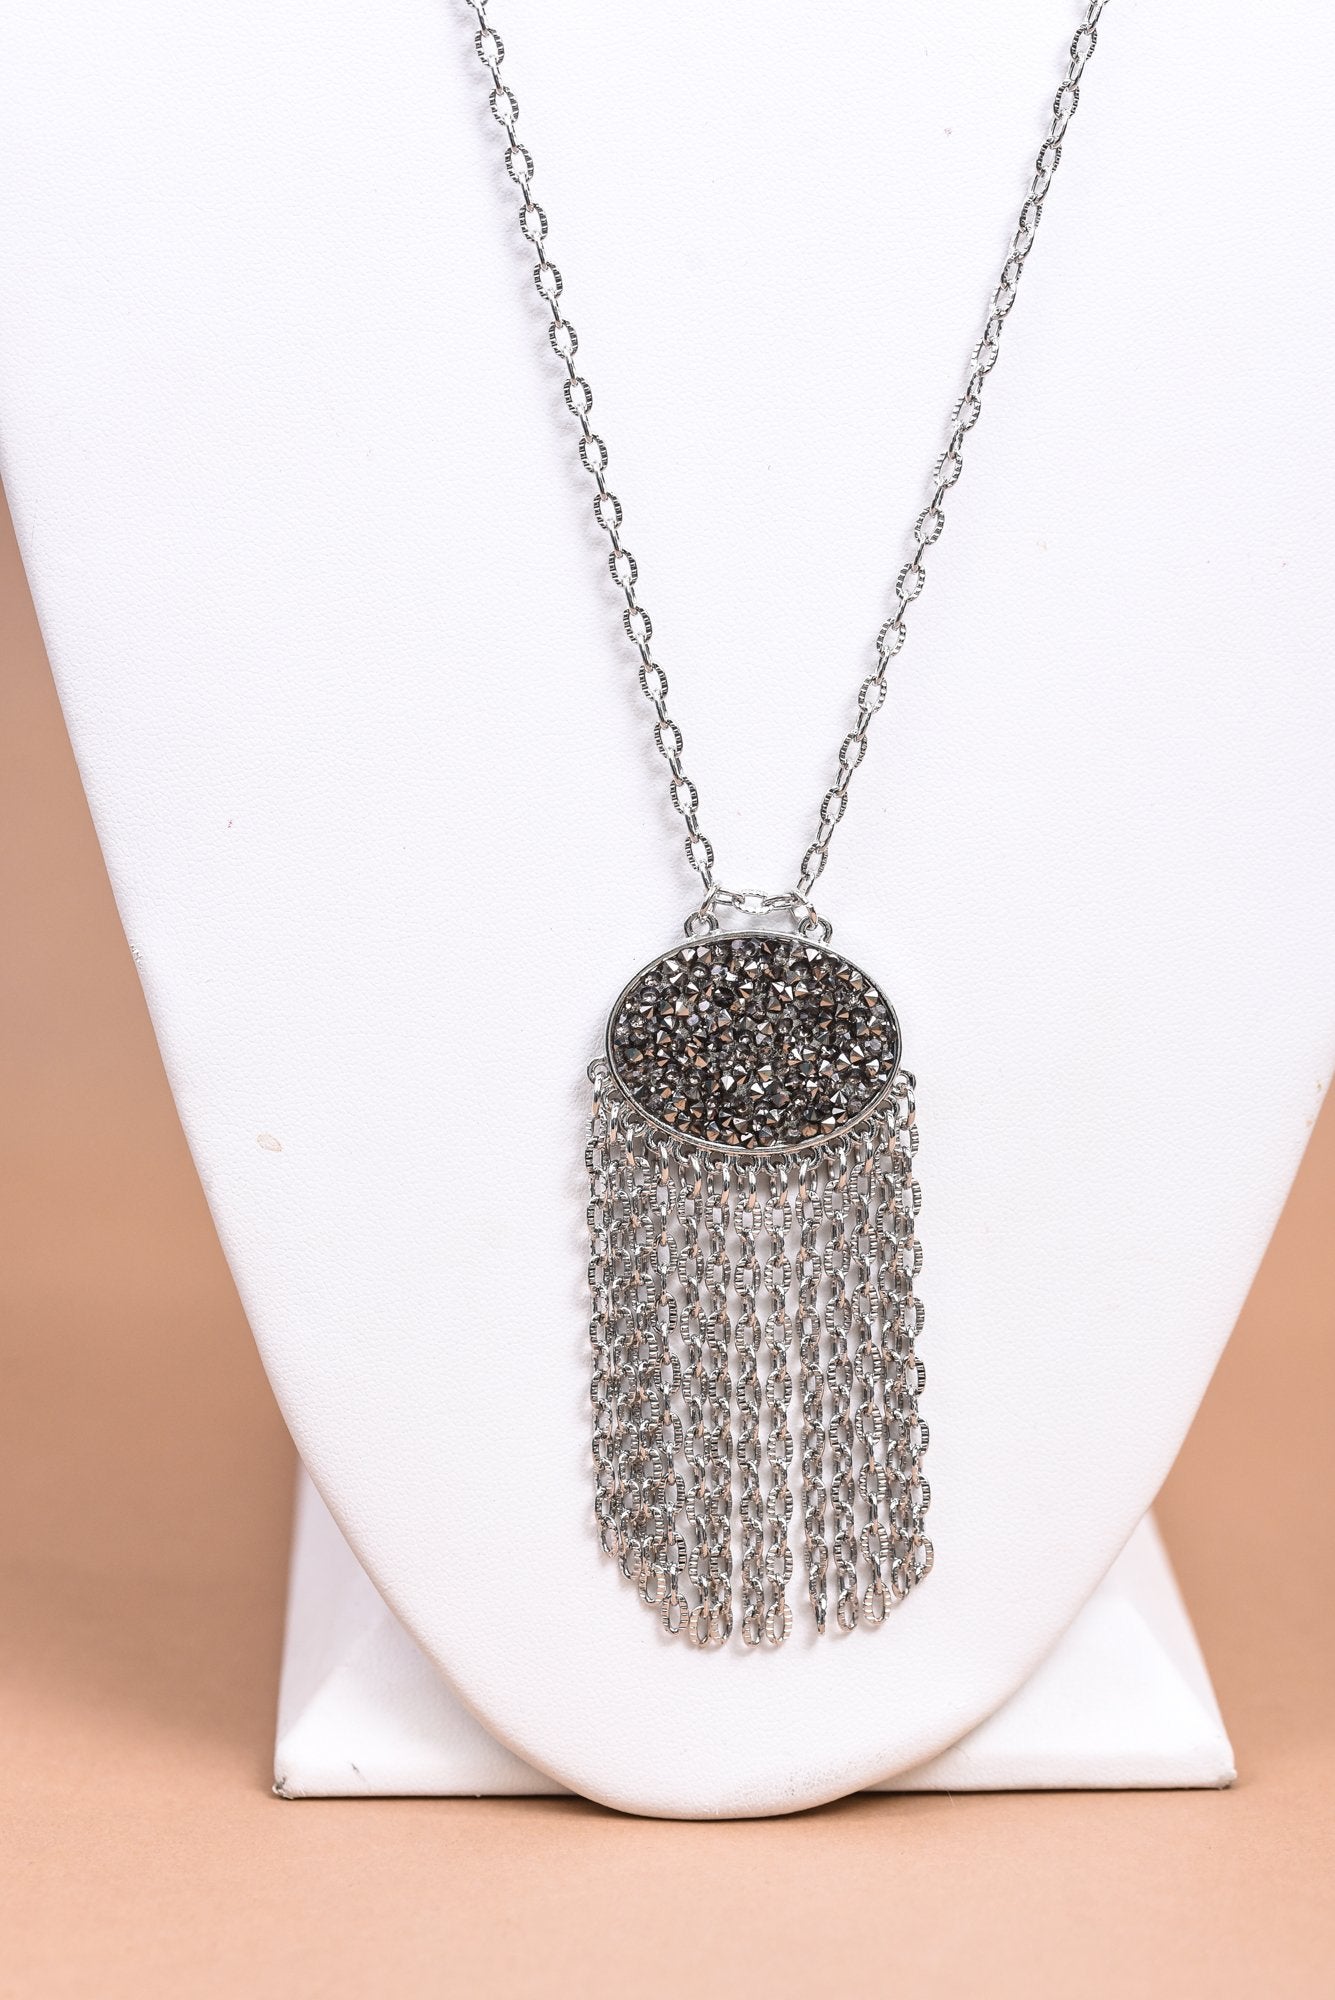 Silver/Gray/Chain Linked Tassel/Crystal Oval Pendant Necklace - NEK3909SI